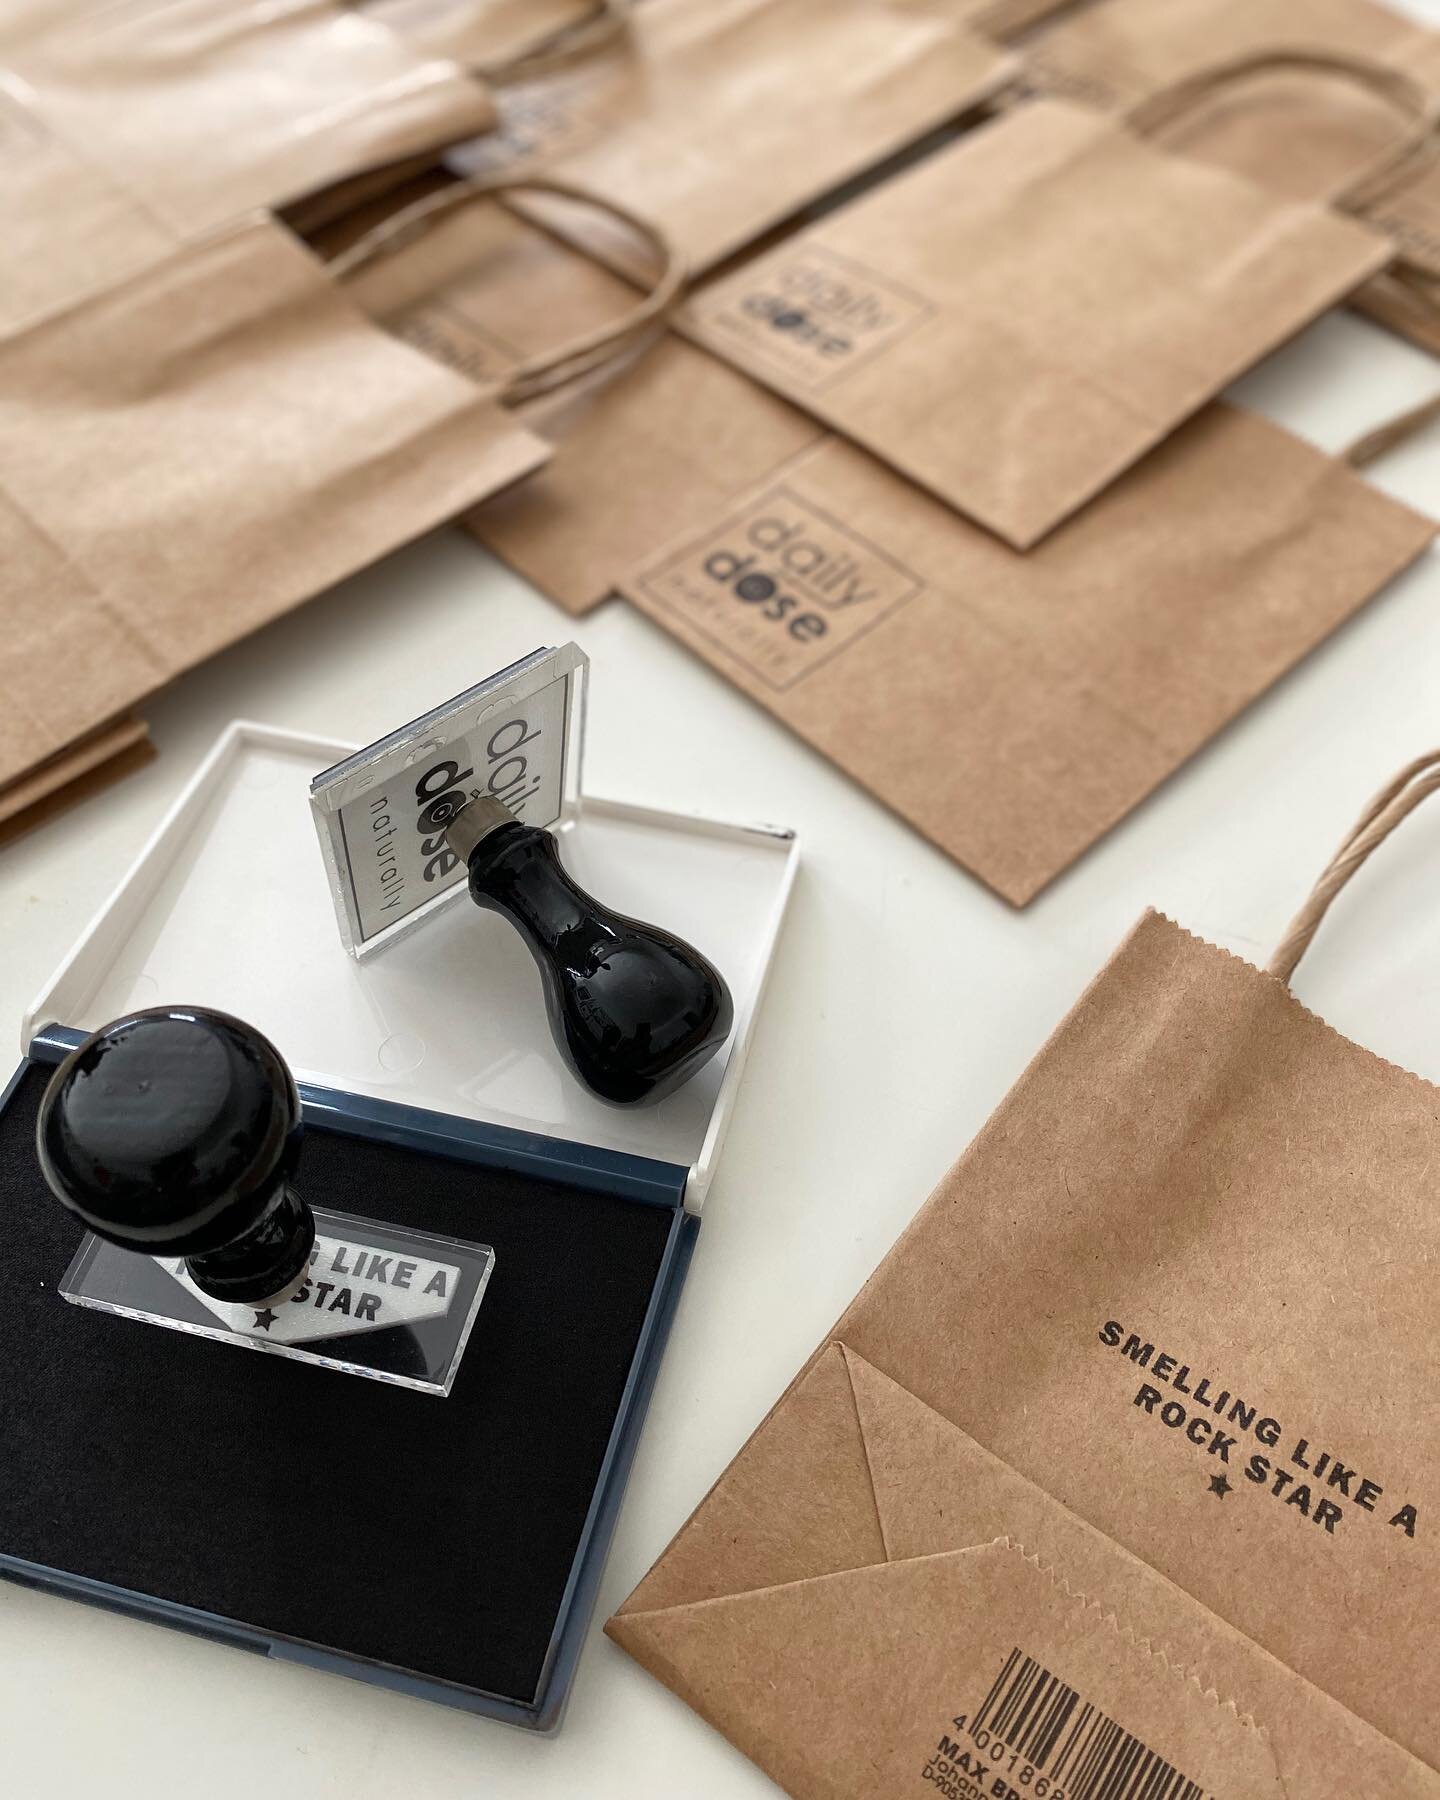 Behind the scenes at the Daily Dose Naturally studio today, Donna is hand stamping merch bags and boxes (and loving it!). As a designer, printmaker and interior architect, an enormous emphasis on aesthetics goes into each and every step of the produc